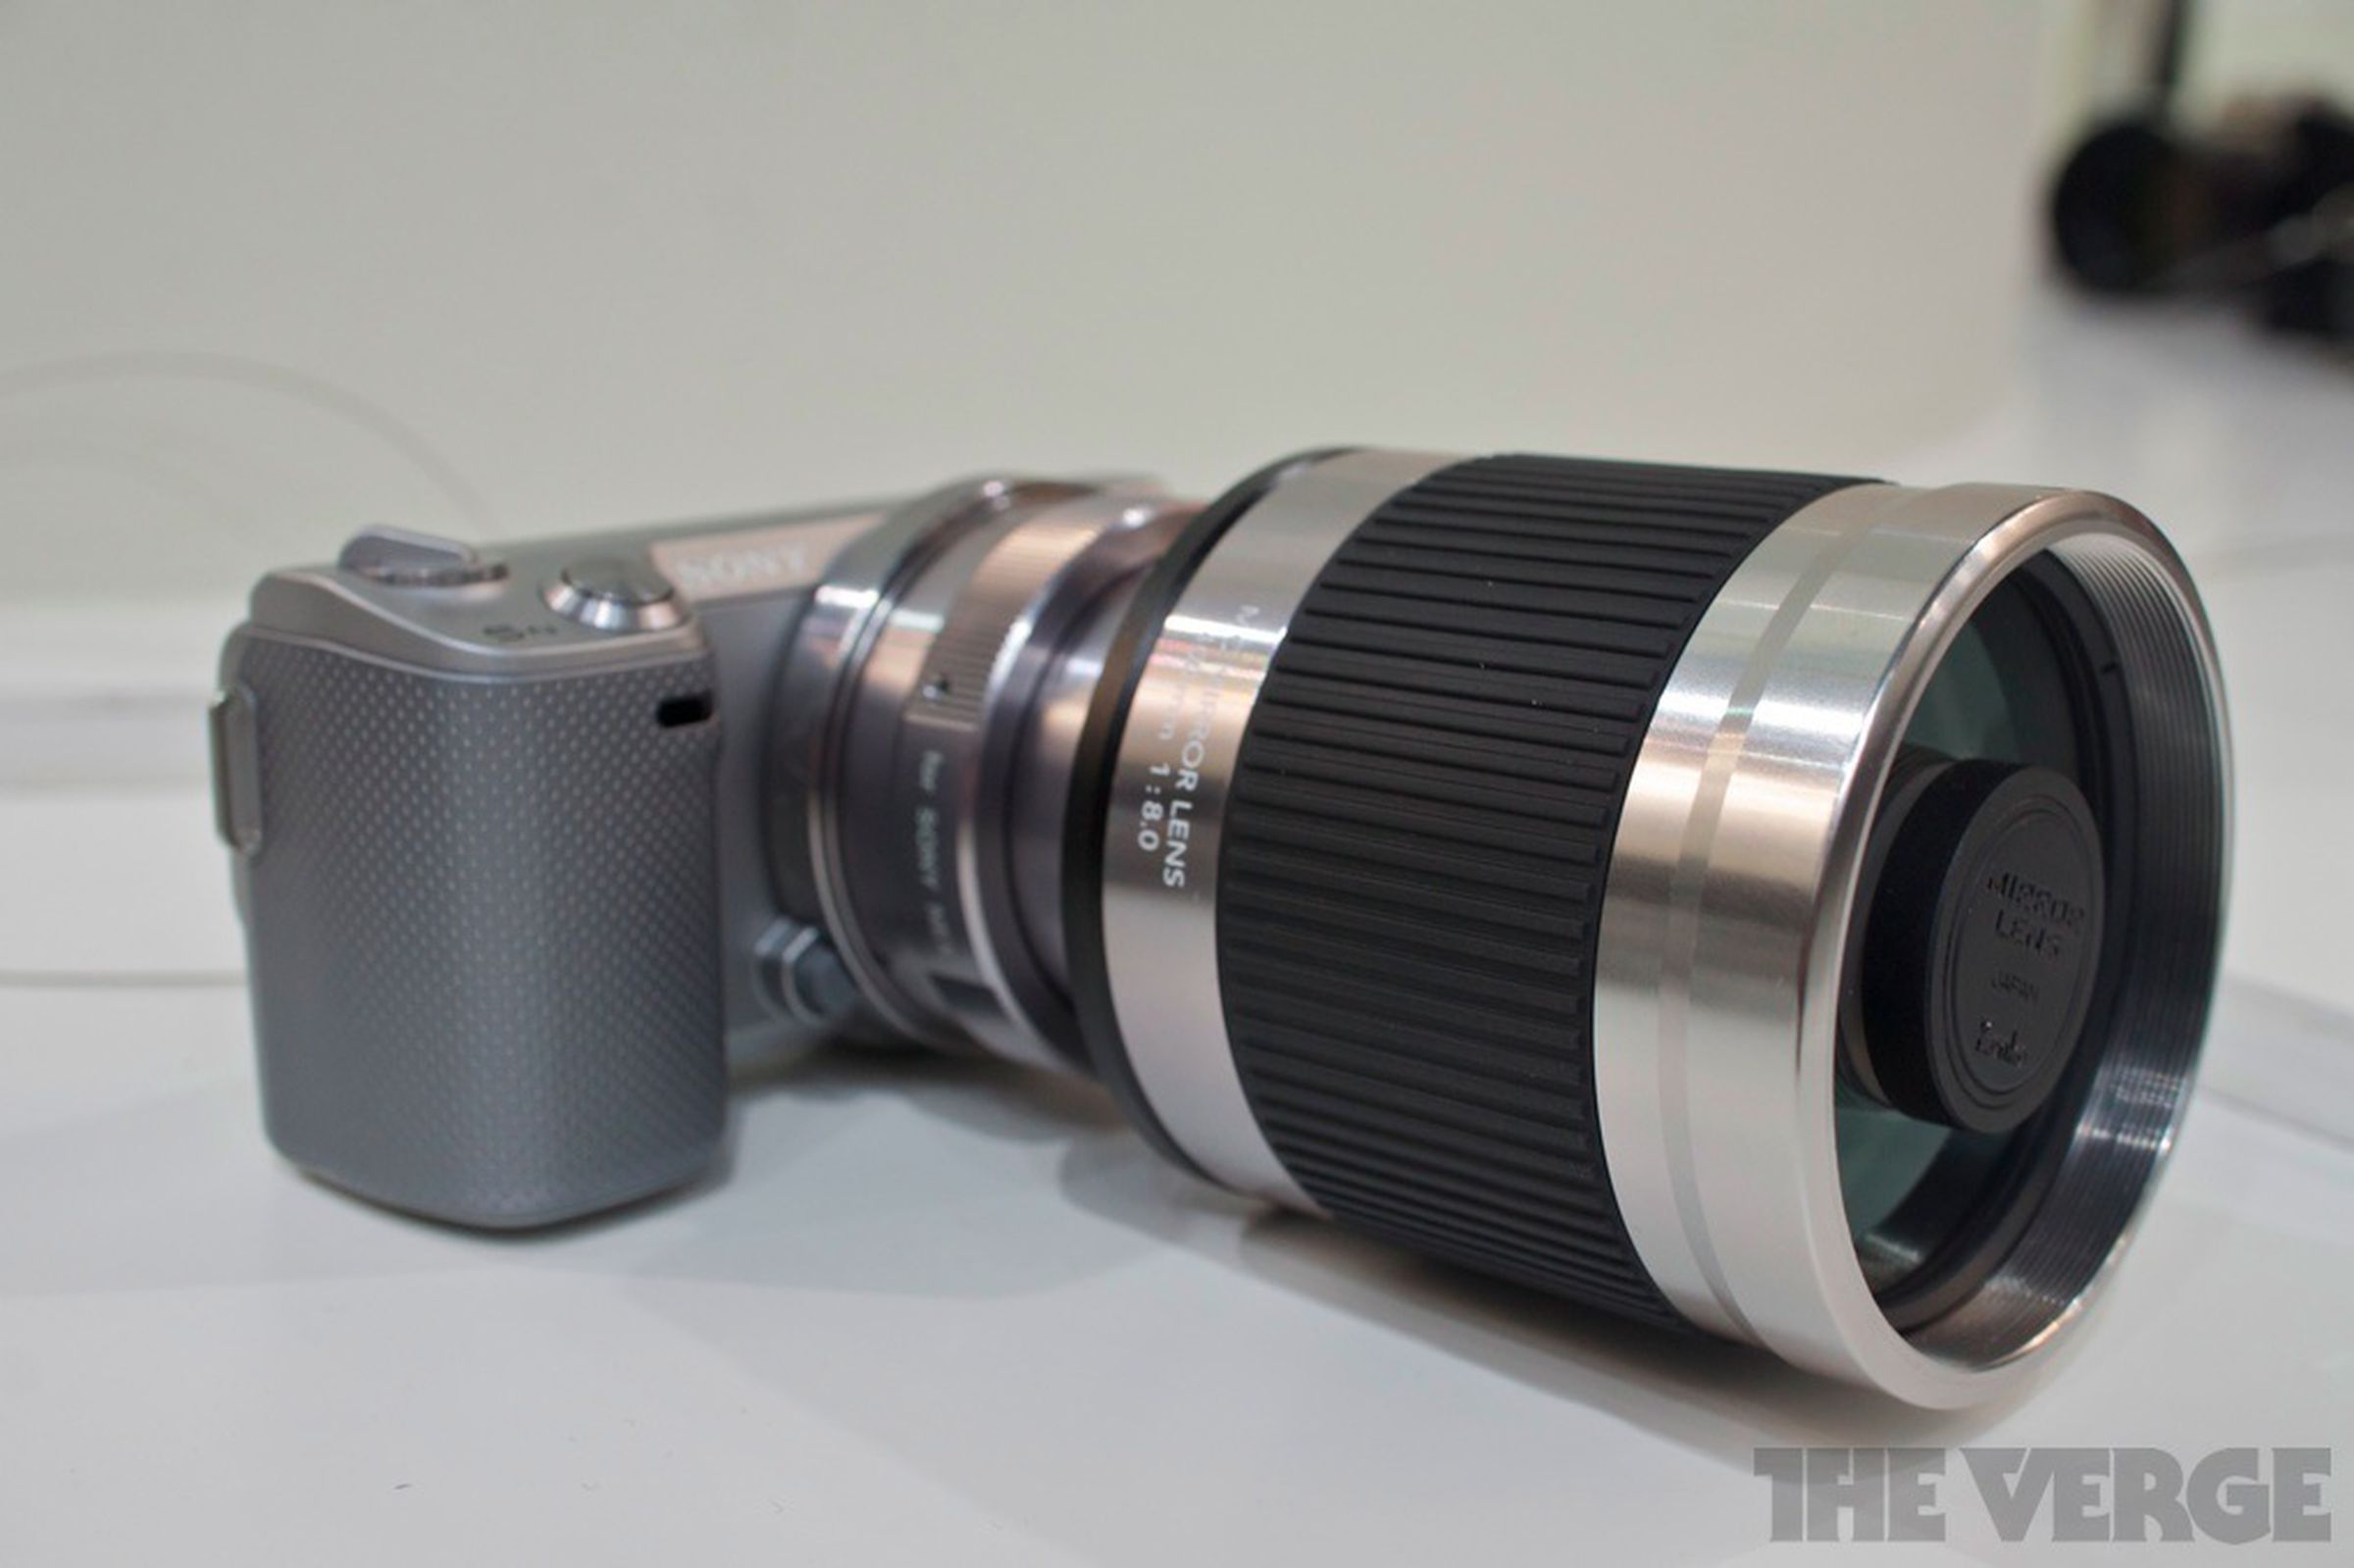 Kenko Tokina 400mm f/8 mirror lens pictures and samples